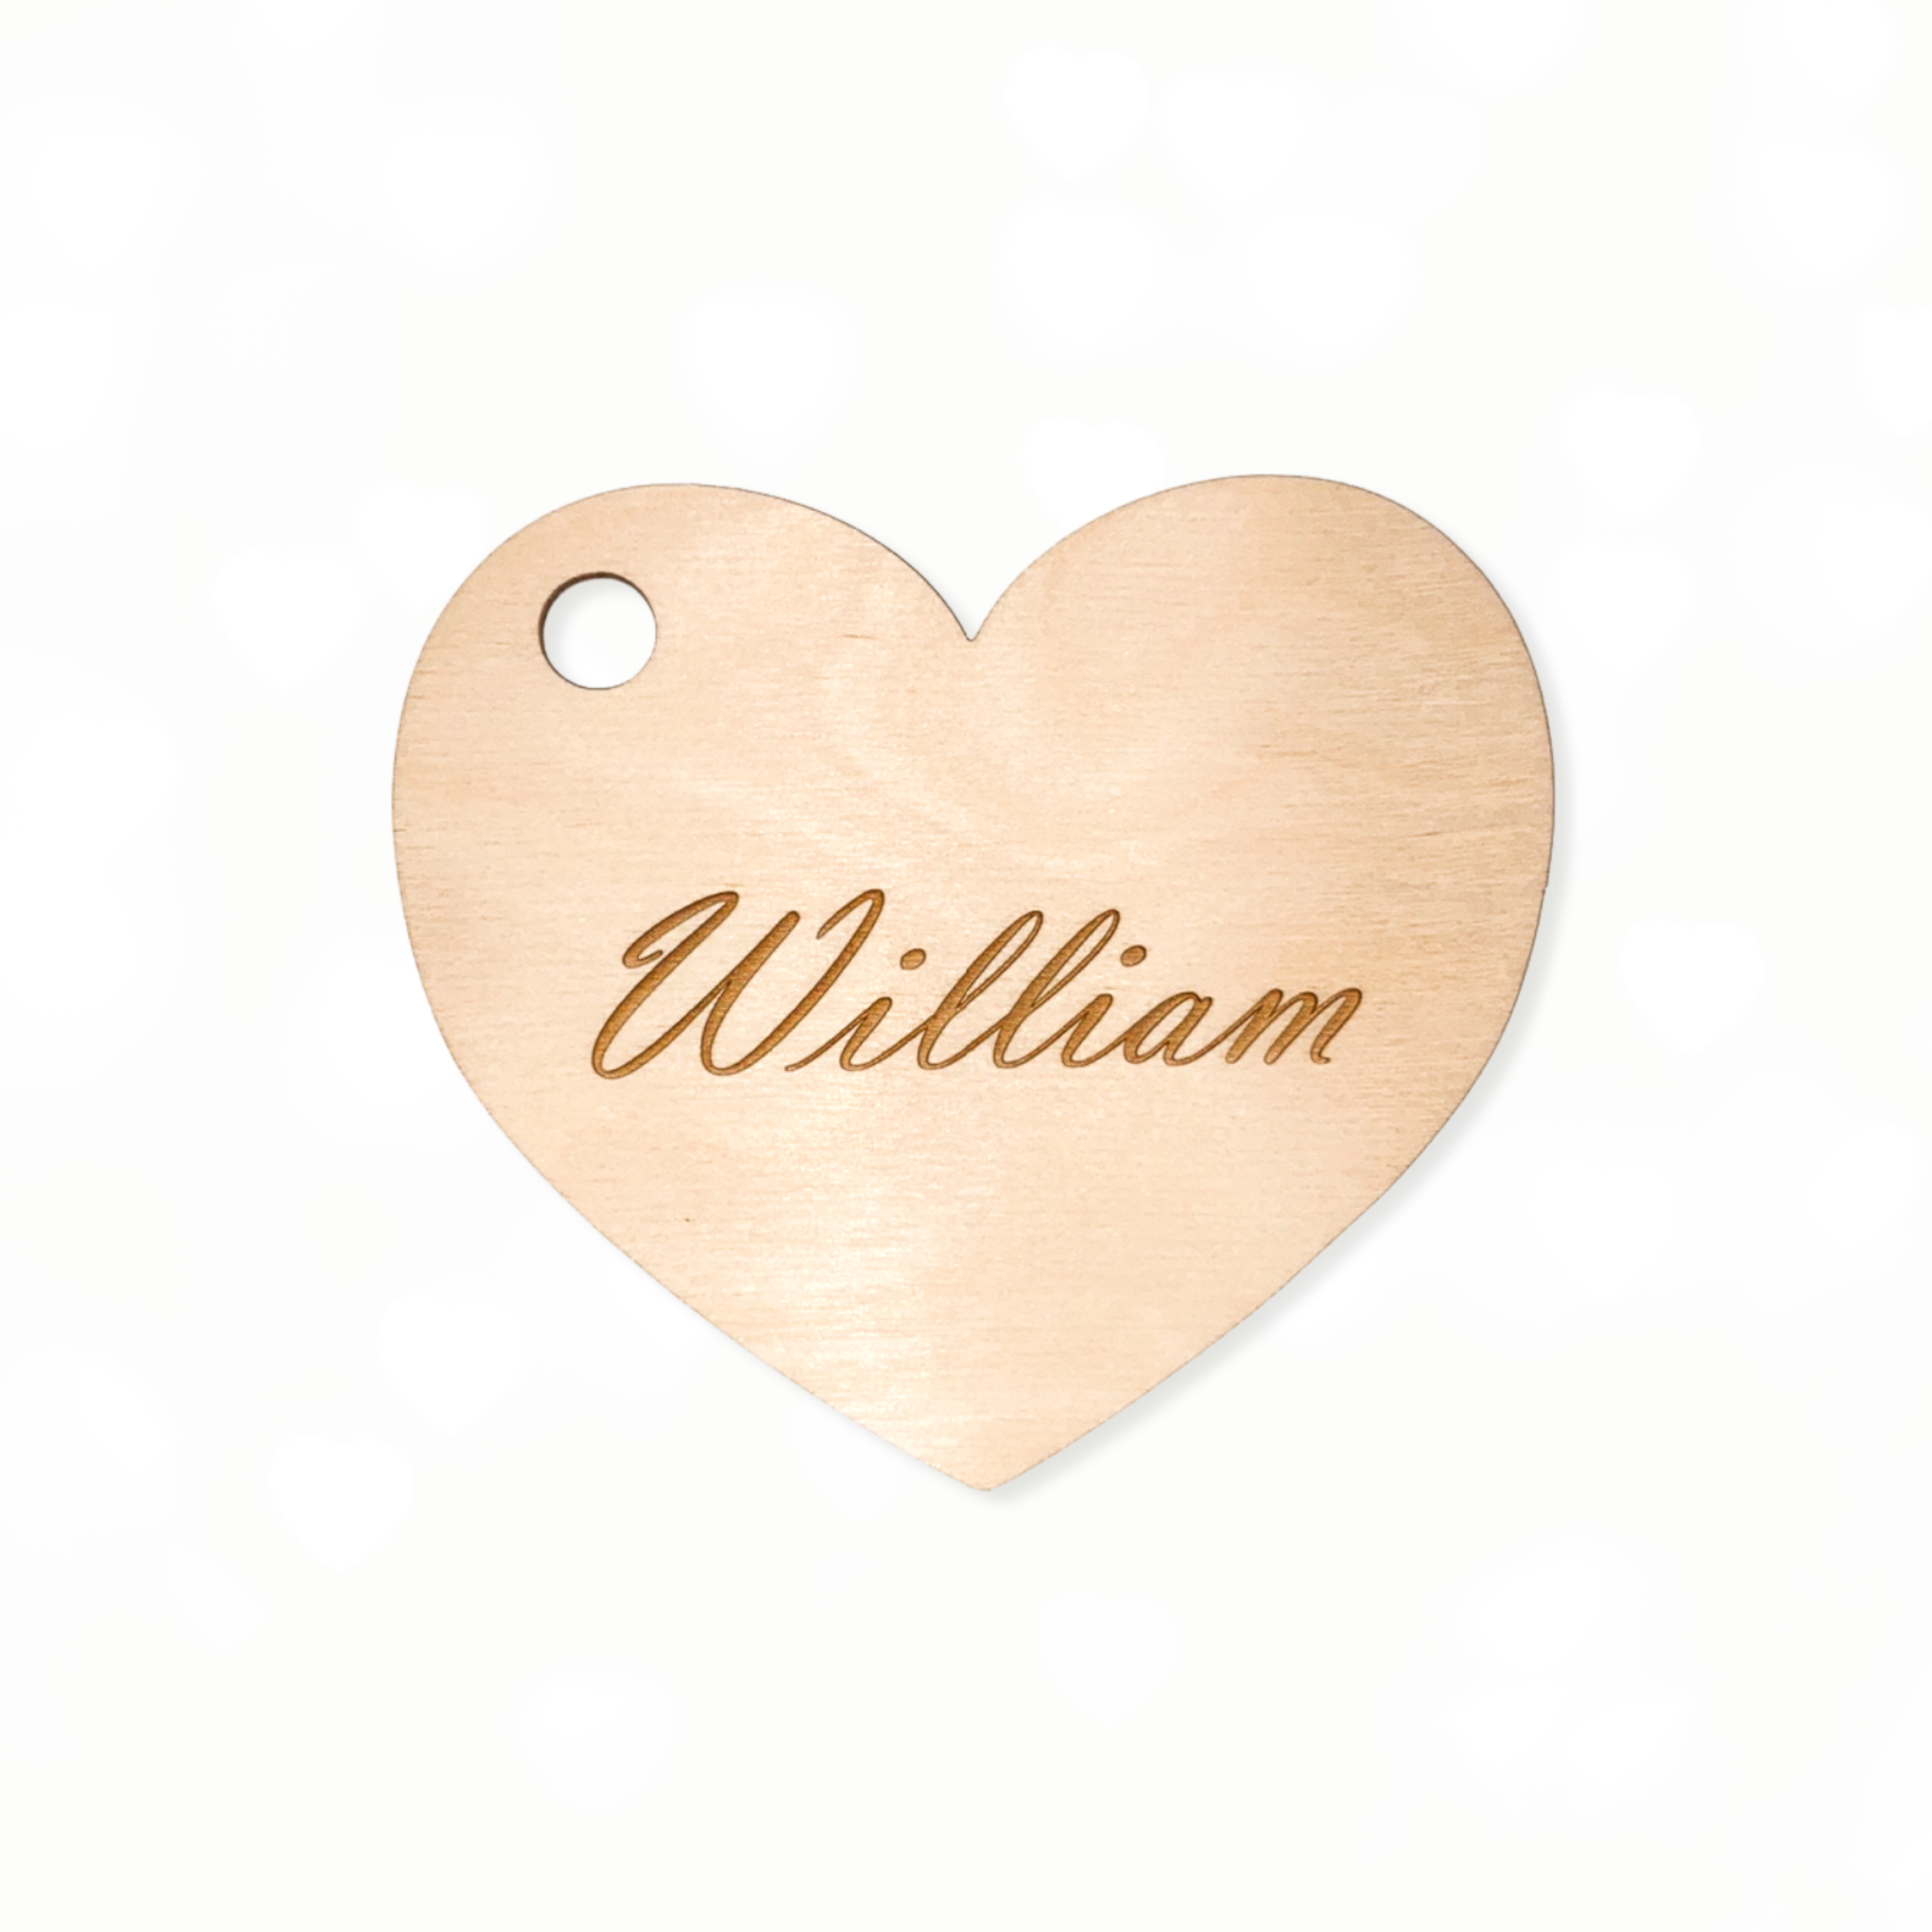 Personalized heart shaped label